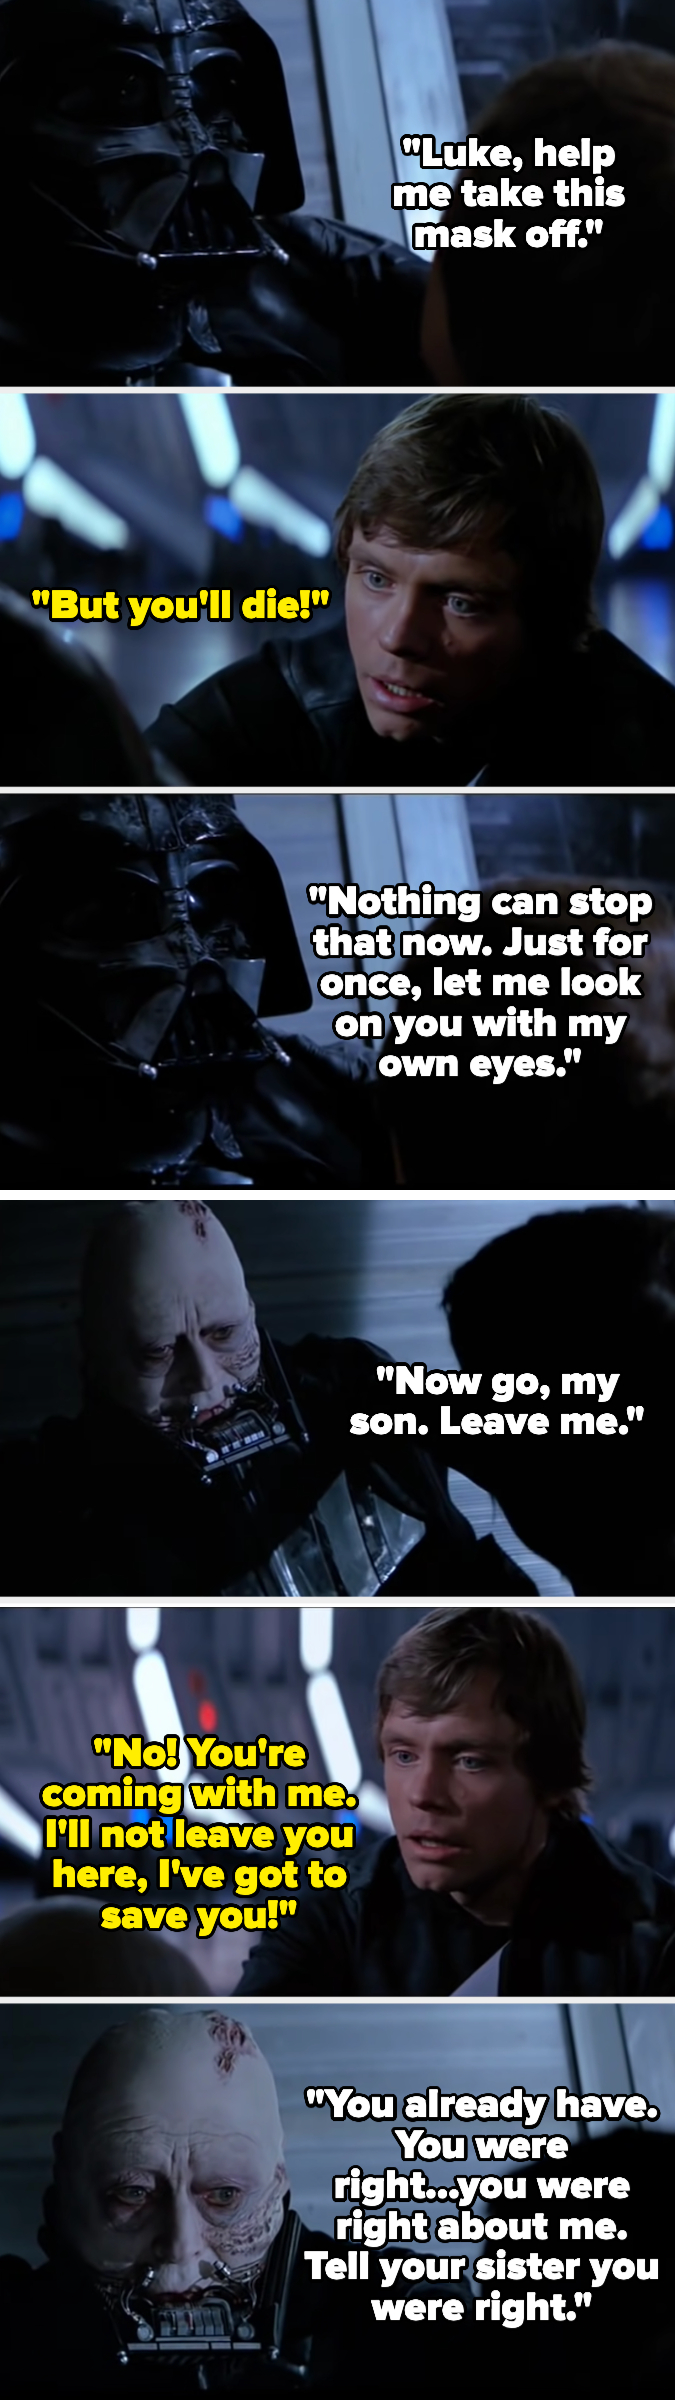 Vader takes his mask off and tells him Luke saved his life